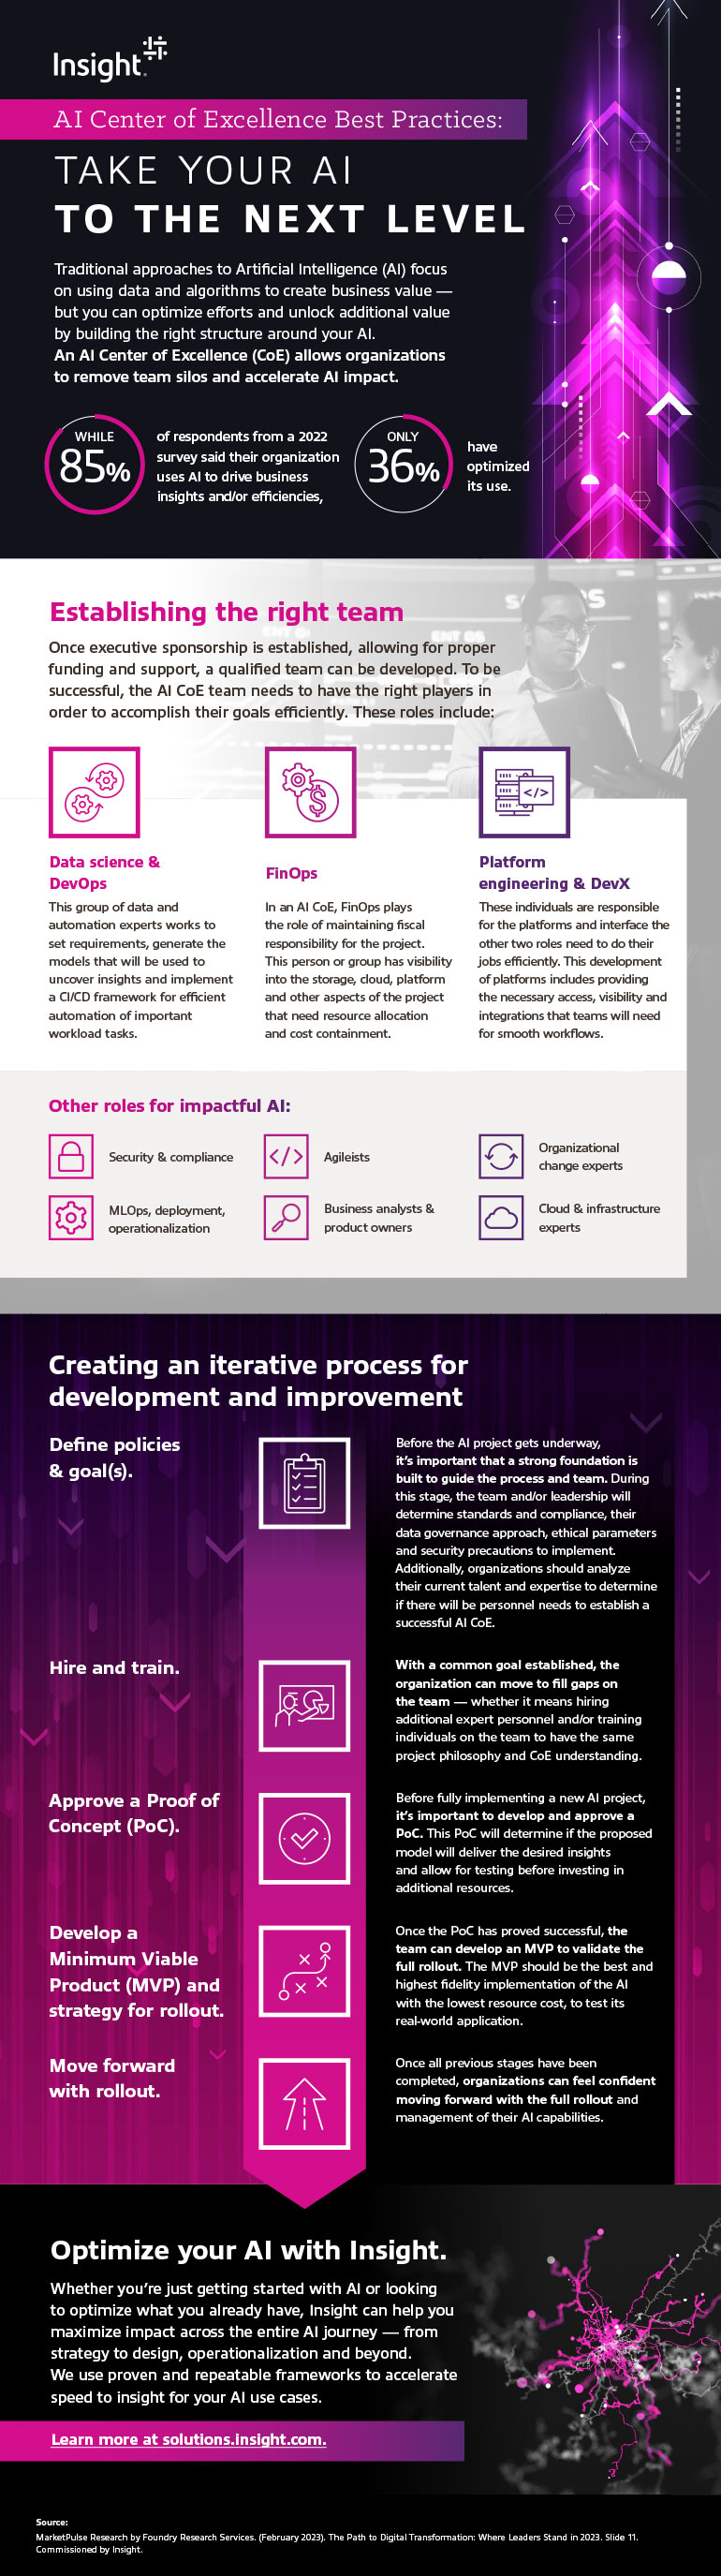 AI Center of Excellence Best Practices: Take your AI to the Next Level infographic transcribed below.